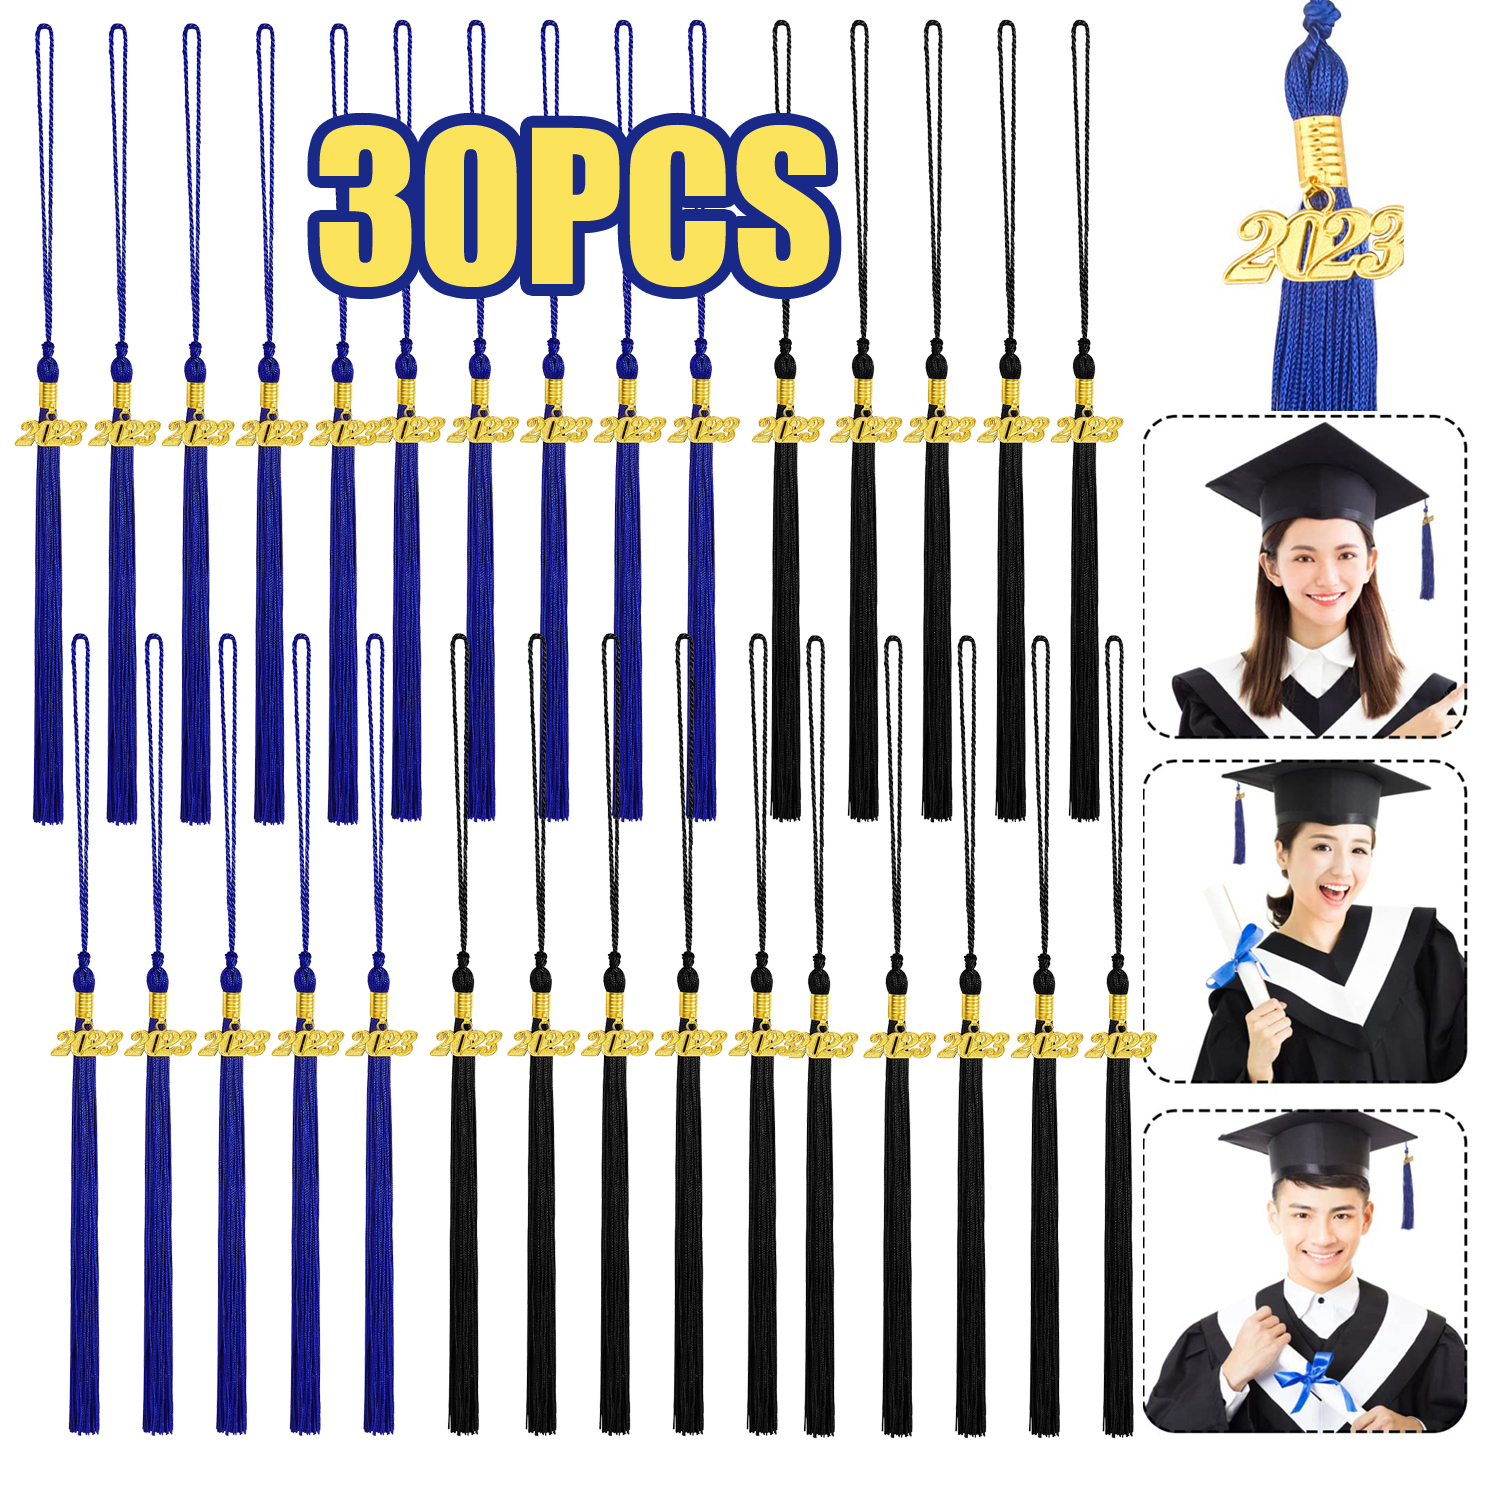 30 Pcs 2023 Graduation Cords Honor Cord with Tassels for College Graduation  Students Bachelor Master Doctor Grad Decor(Black Blue) 